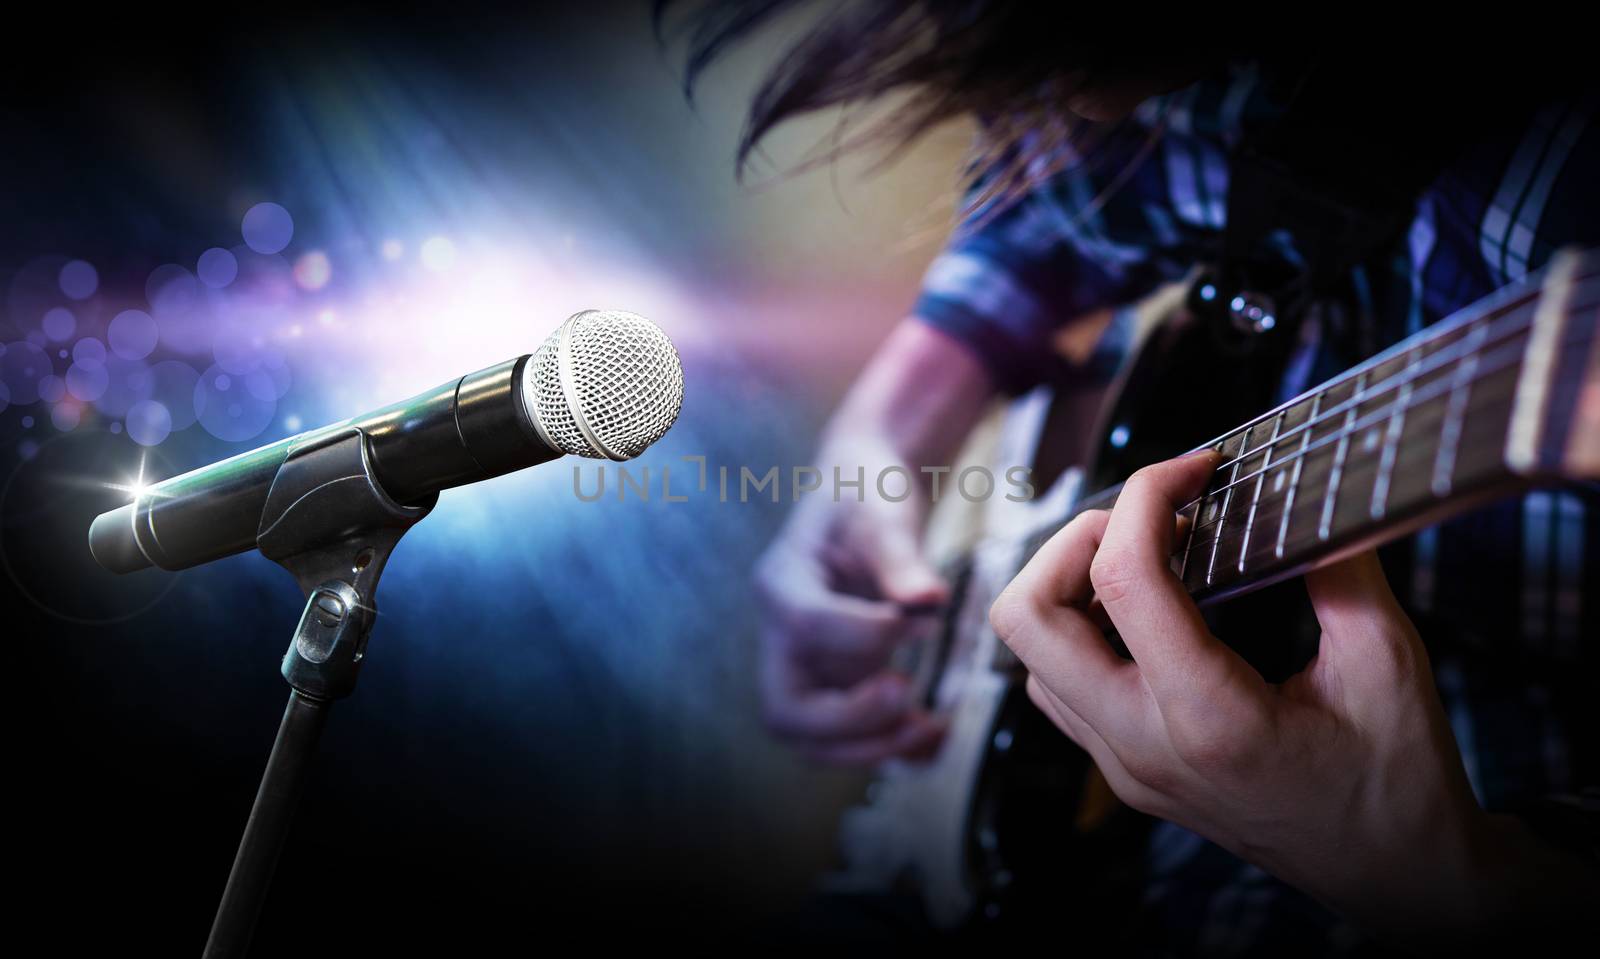 Microphone on stage blurred background playing guitarist on stage, blurred background